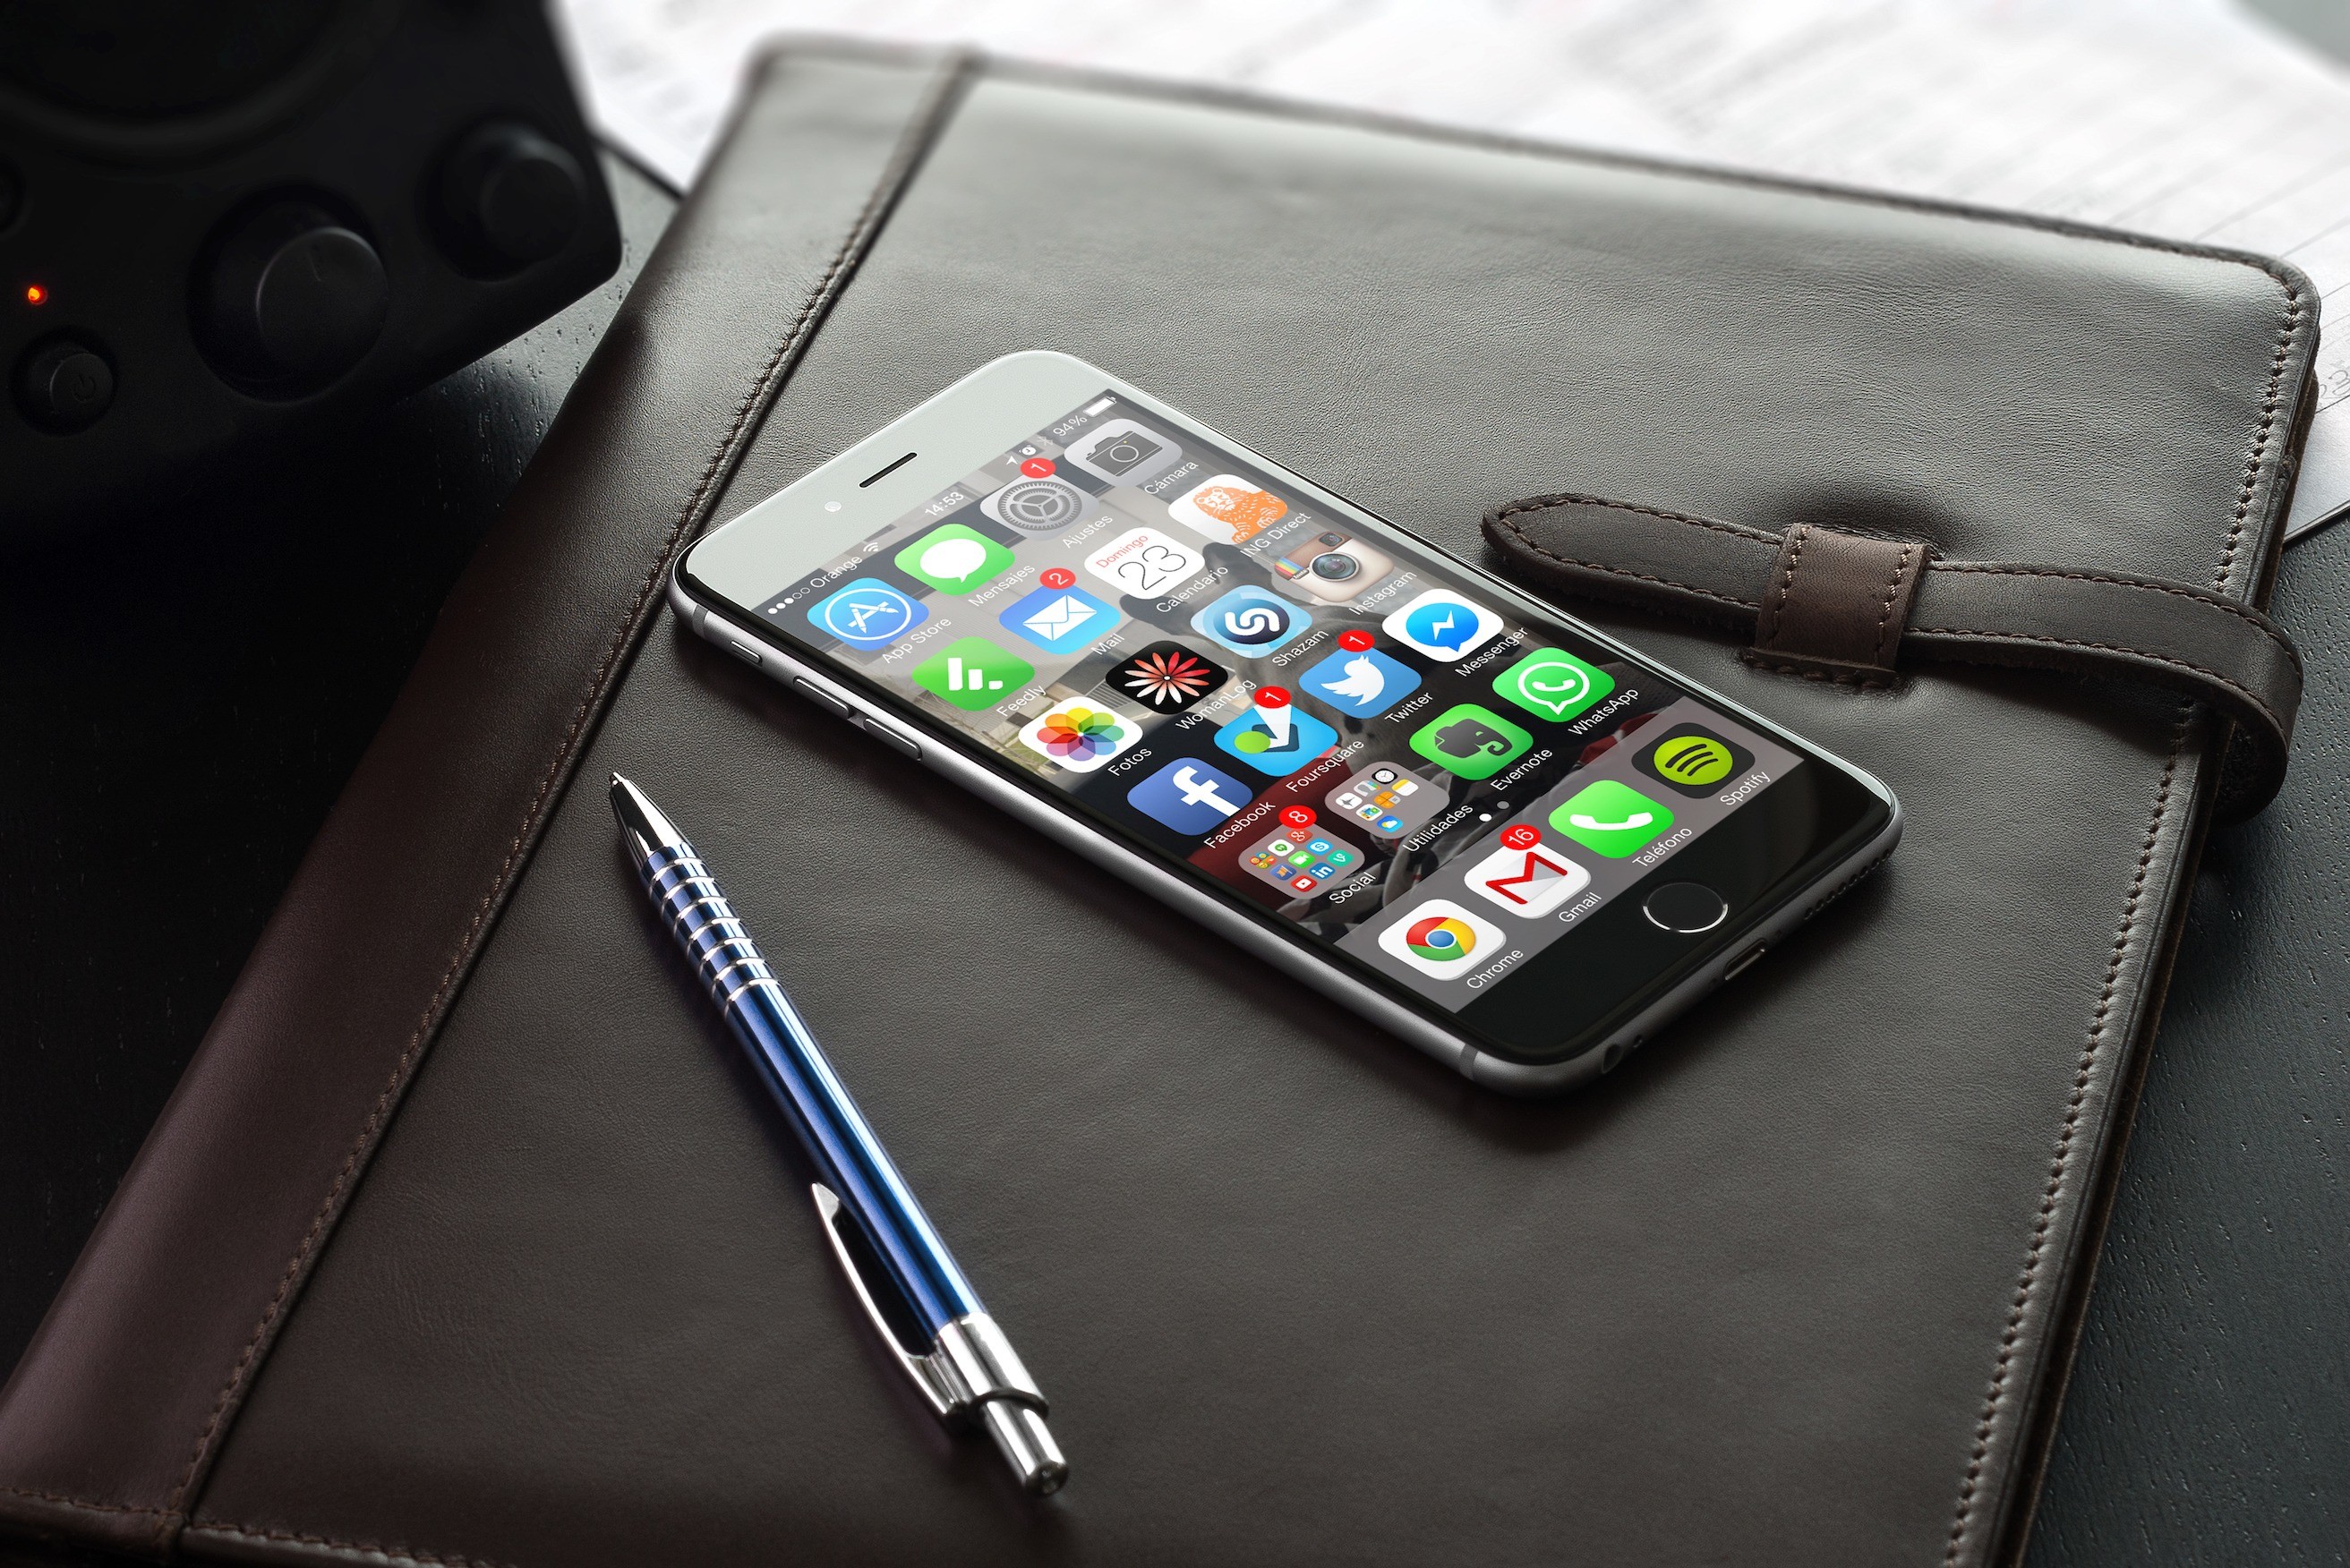 An image of an iPhone laying on a desk showing it's home screen with social media icons on it.